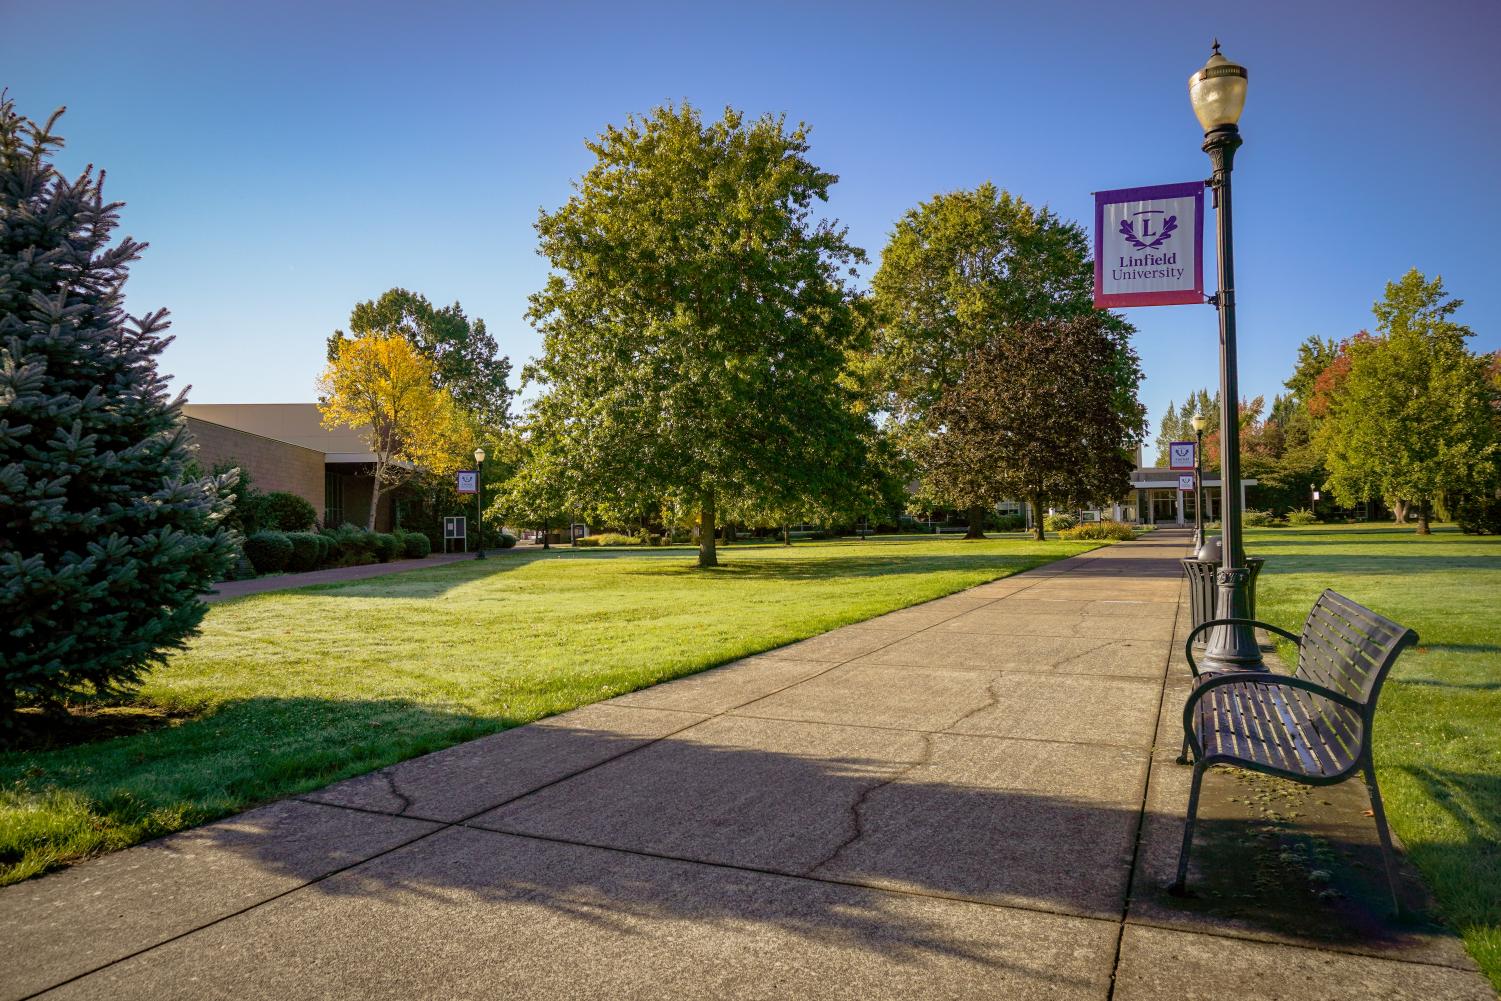 Linfield named one of “Worst Colleges for Free Speech 2022” by free